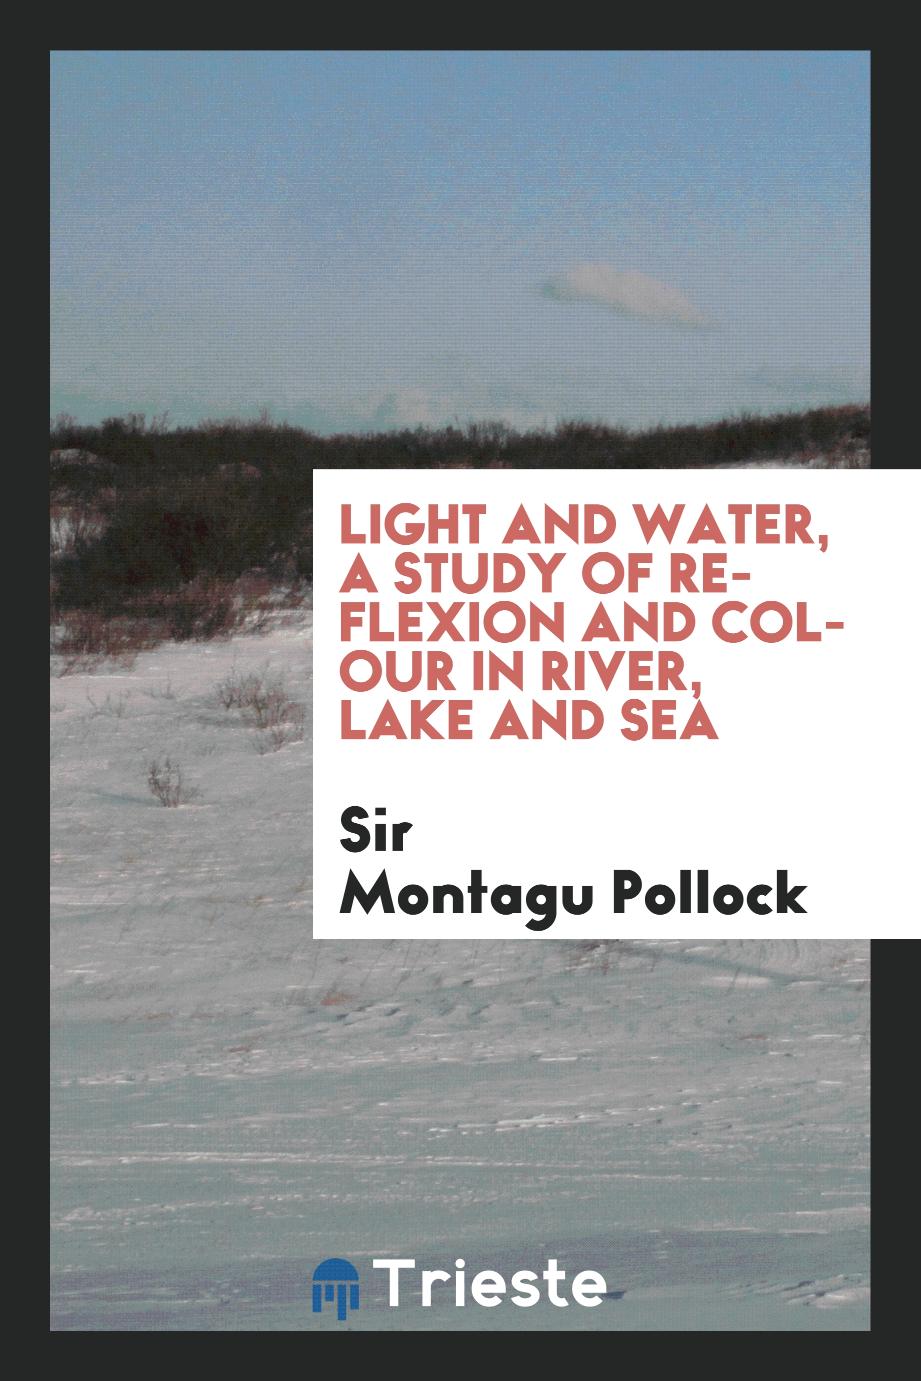 Sir Montagu Pollock - Light and water, a study of reflexion and colour in river, lake and sea